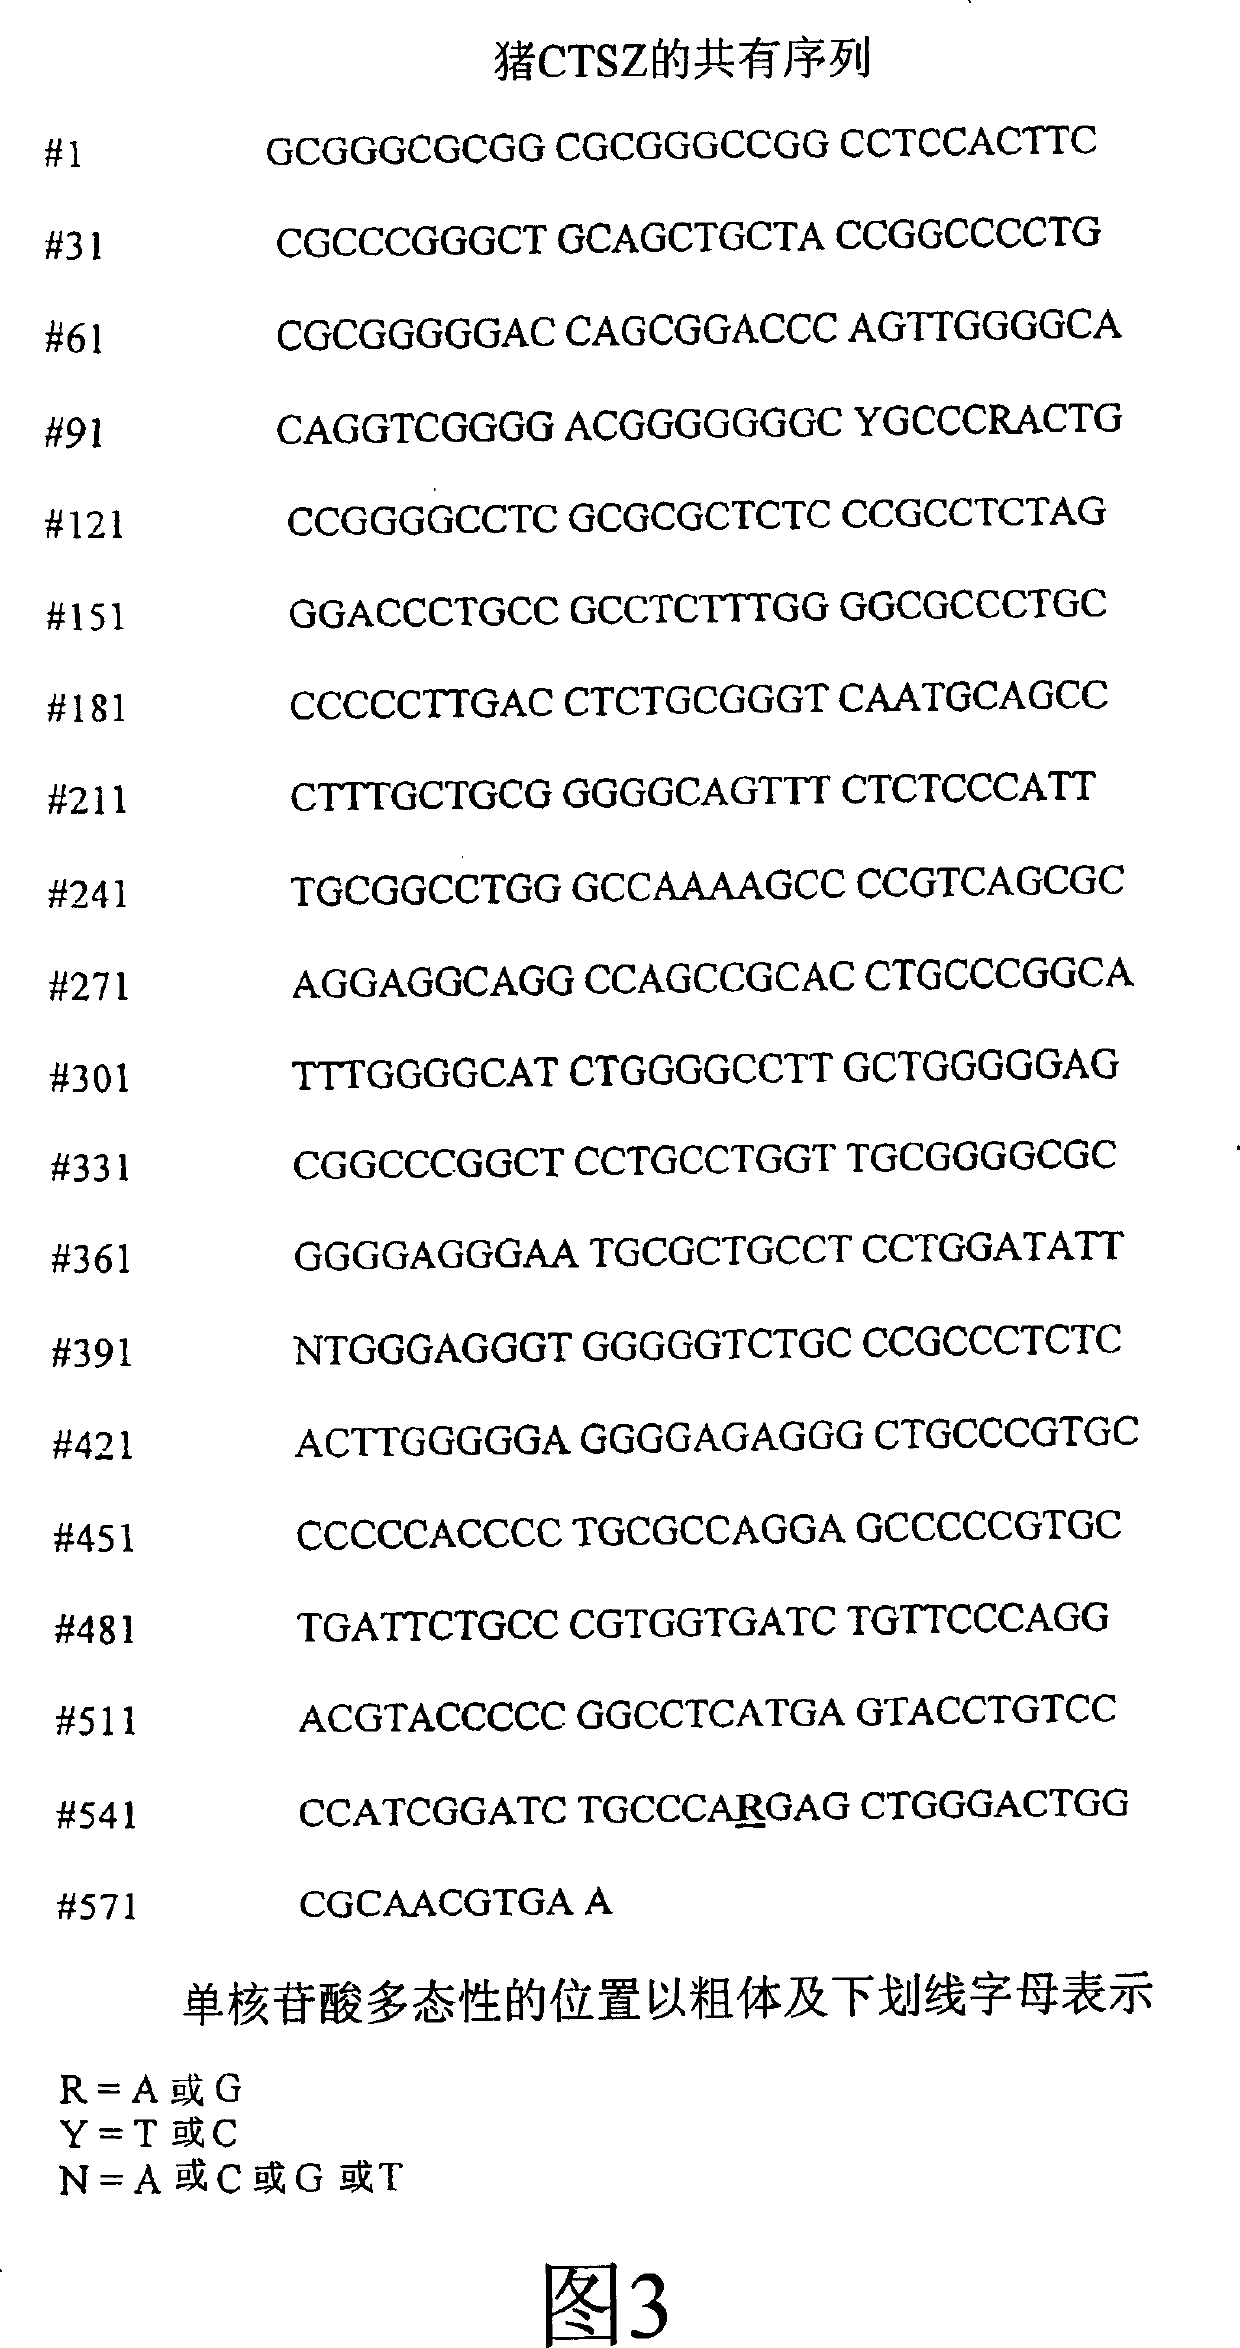 Fine mapping of chromosome 17 quantitative trait loci and use of same for marker assisted selection